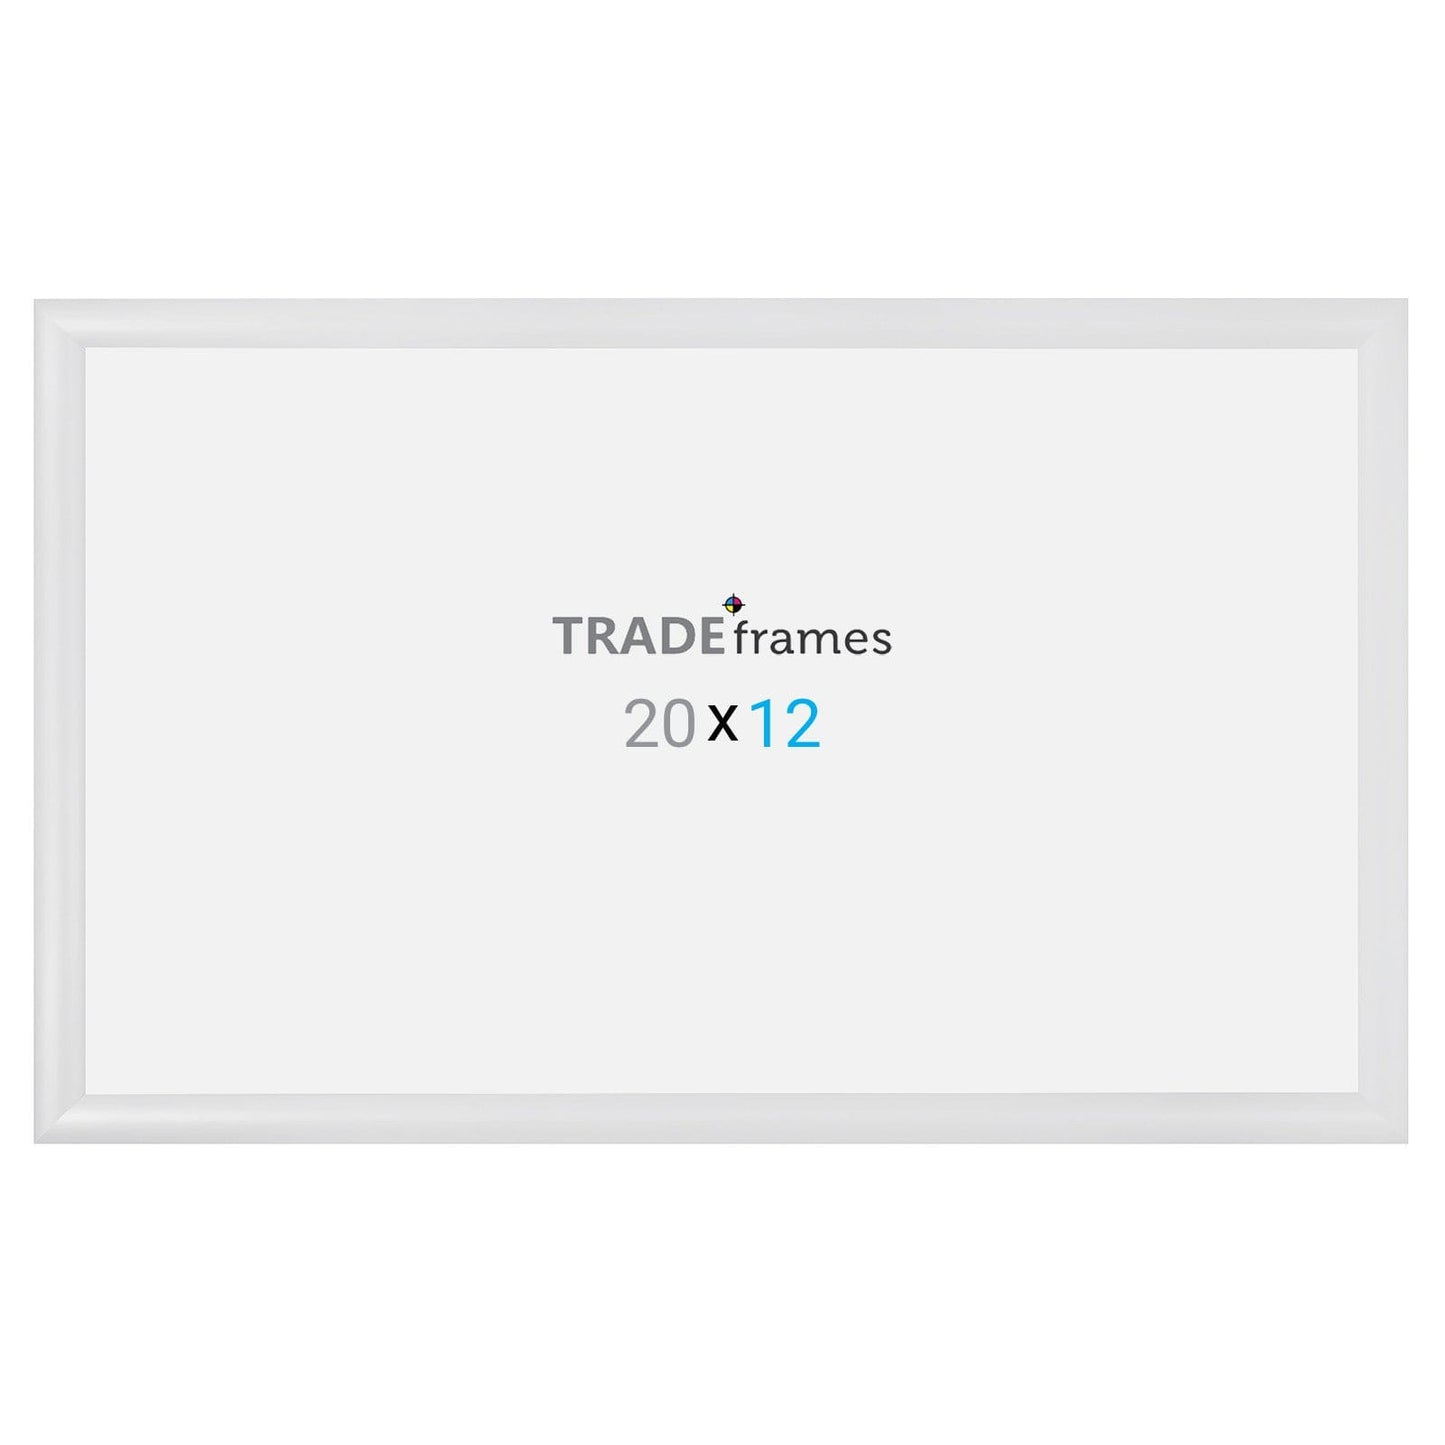 12x20 TRADEframe White Snap Frame 12x20 - 1.2 inch profile - Snap Frames Direct